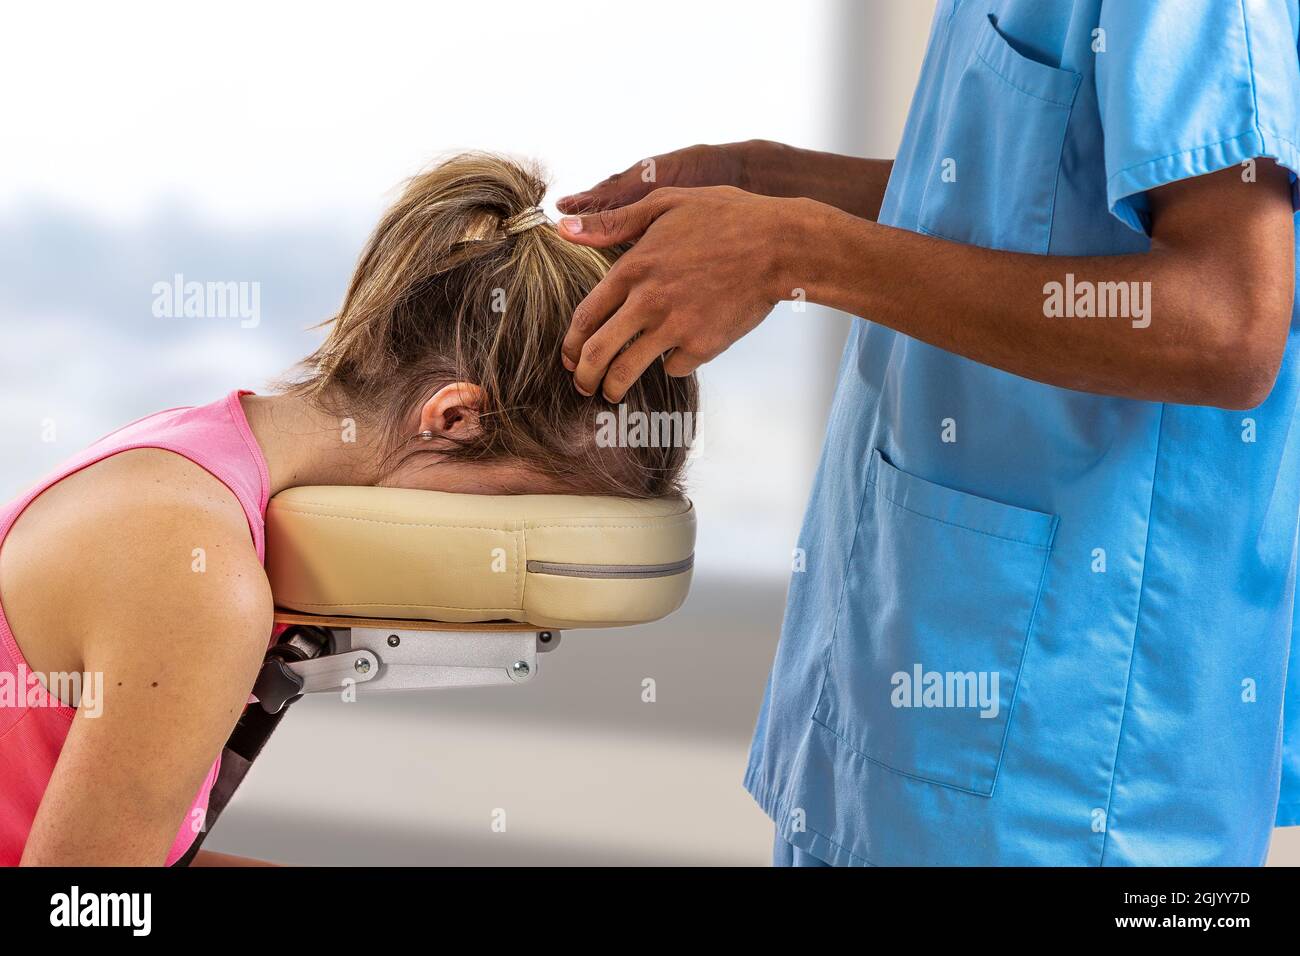 Woman lying on the back while being massaged on her head in a room Stock Photo